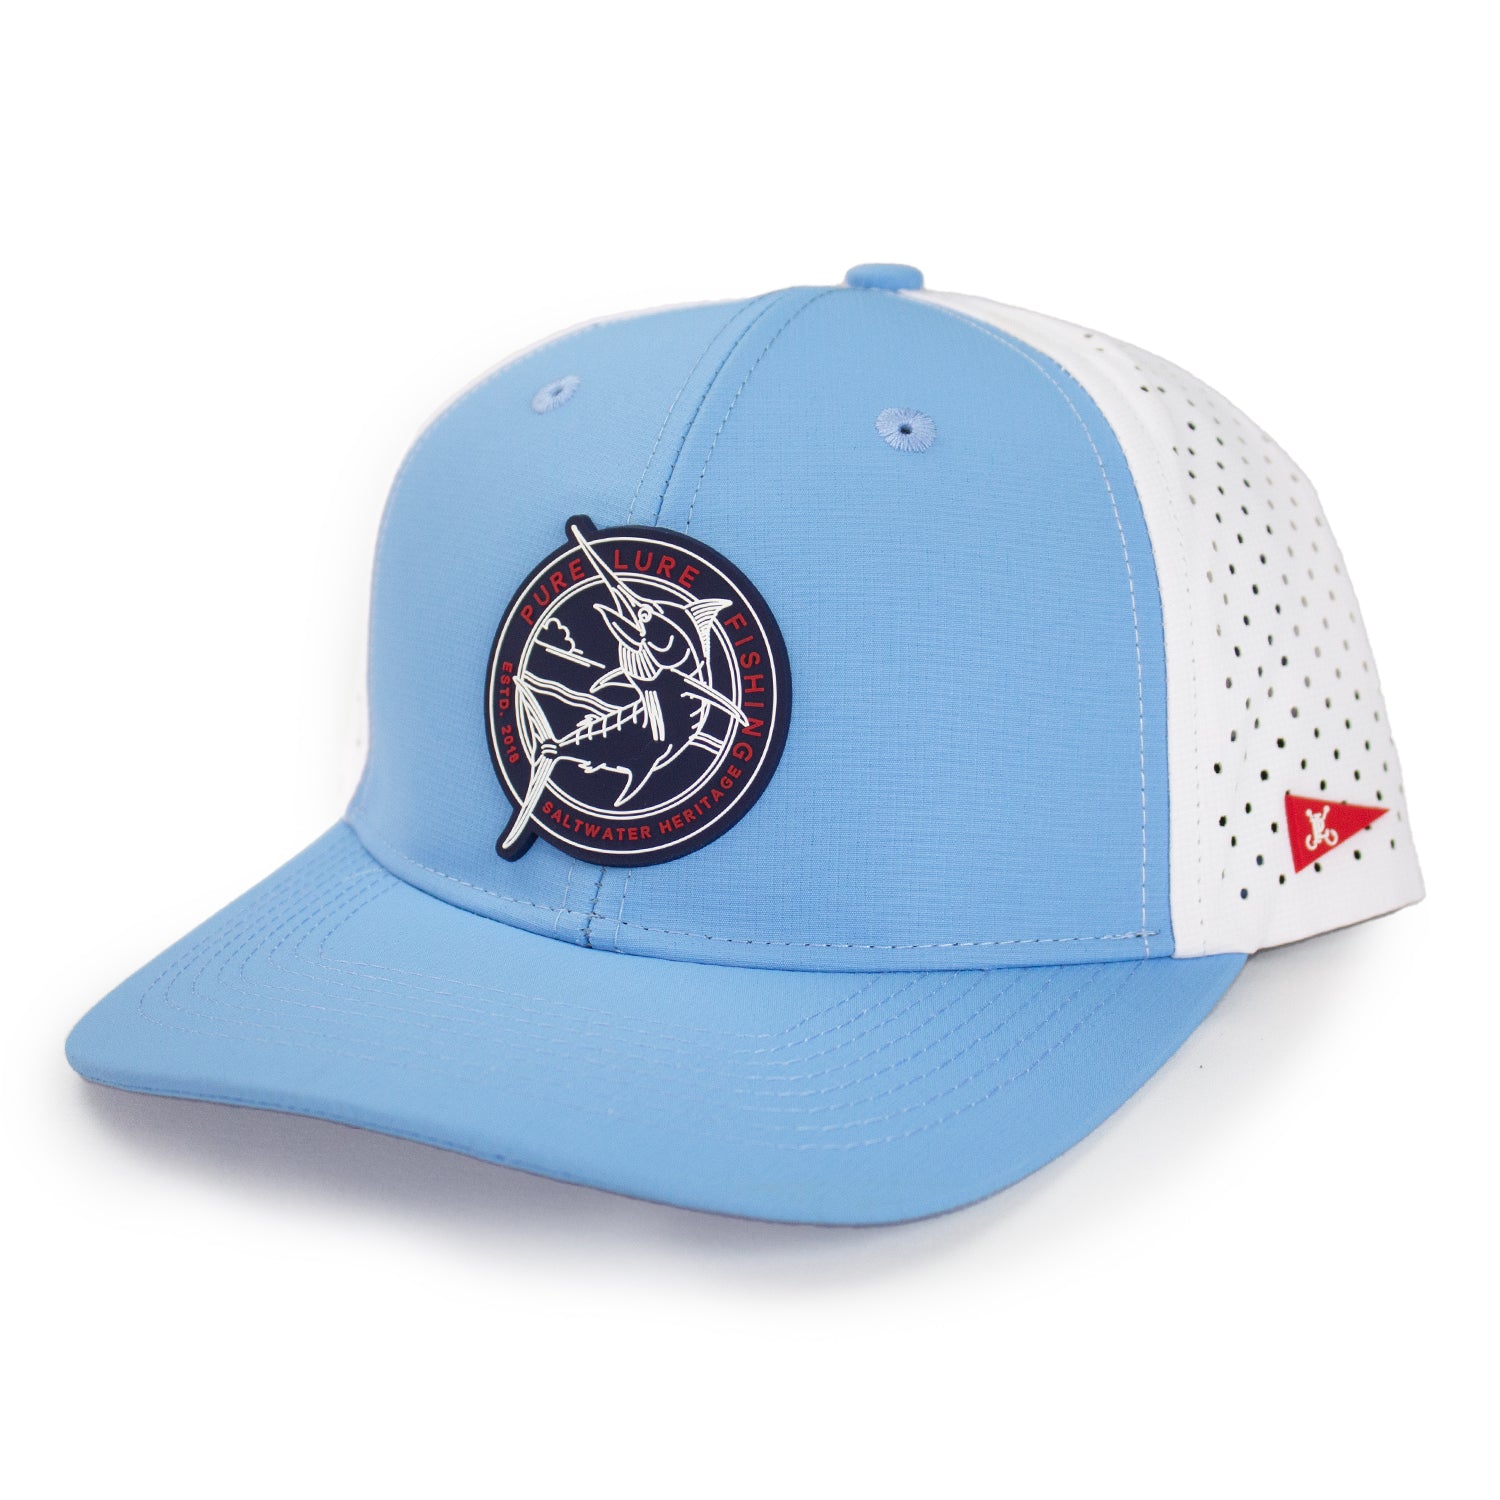 Marlinscape Performance Hat